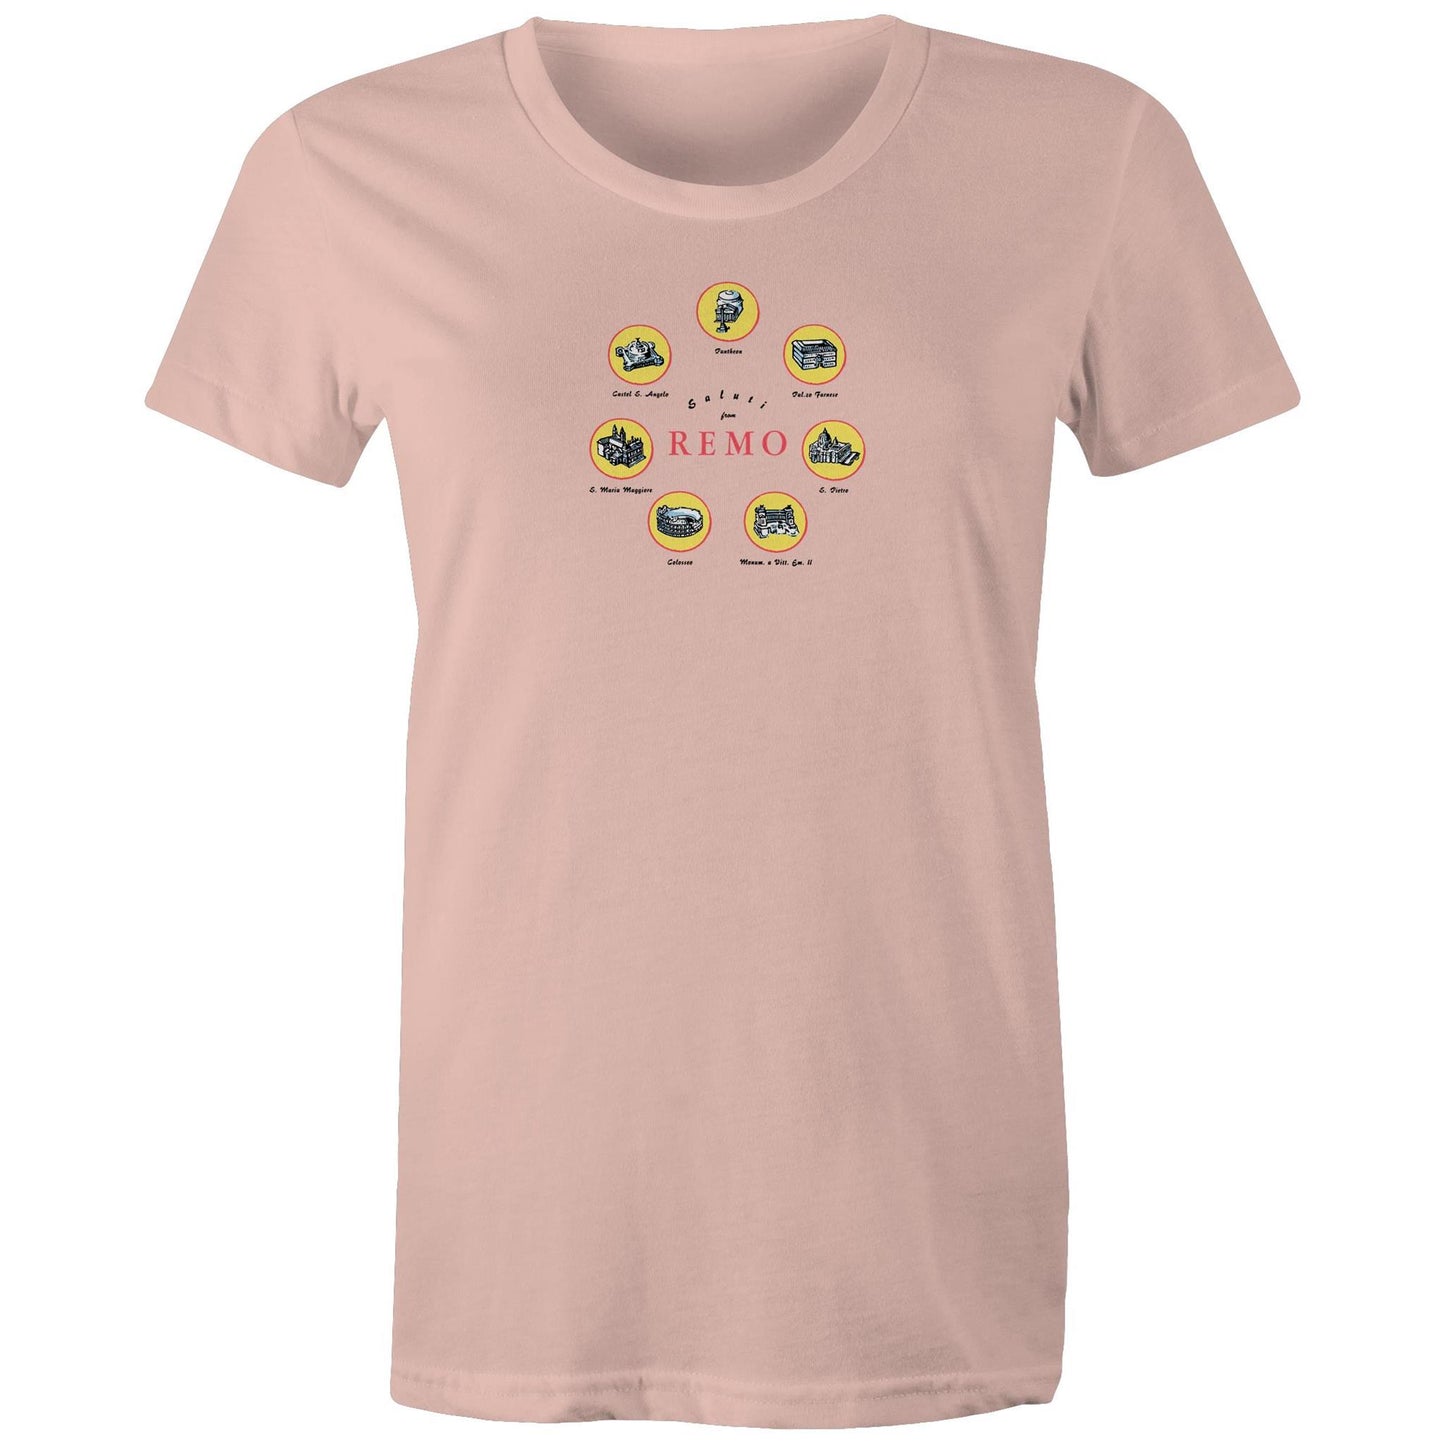 Saluti from REMO T Shirts for Women